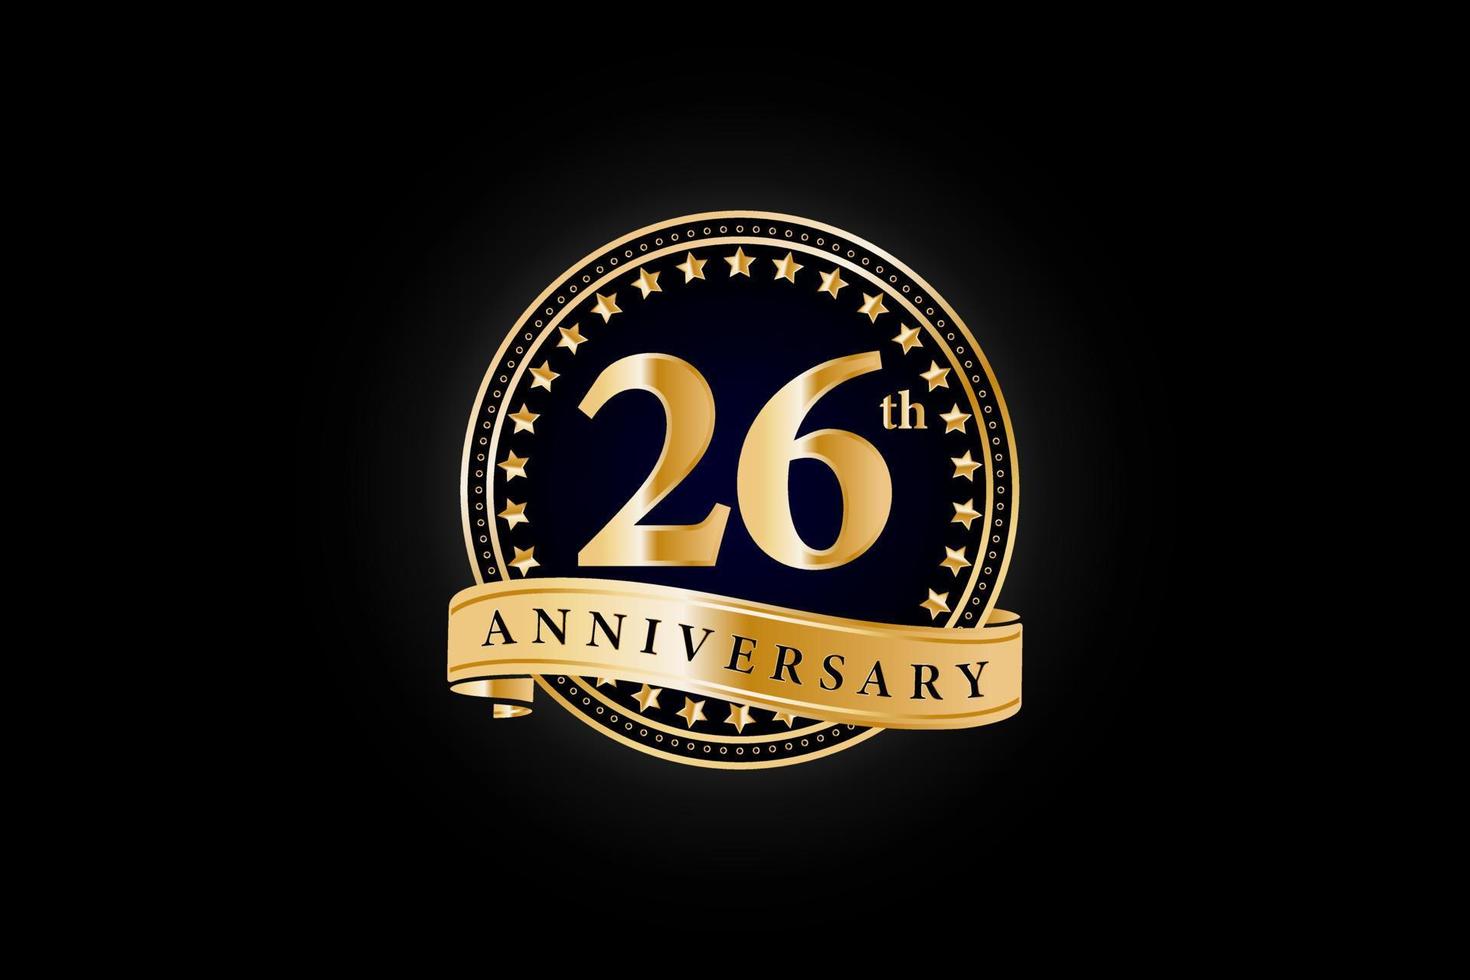 26th Anniversary golden gold logo with ring and gold ribbon isolated on black background, vector design for celebration.